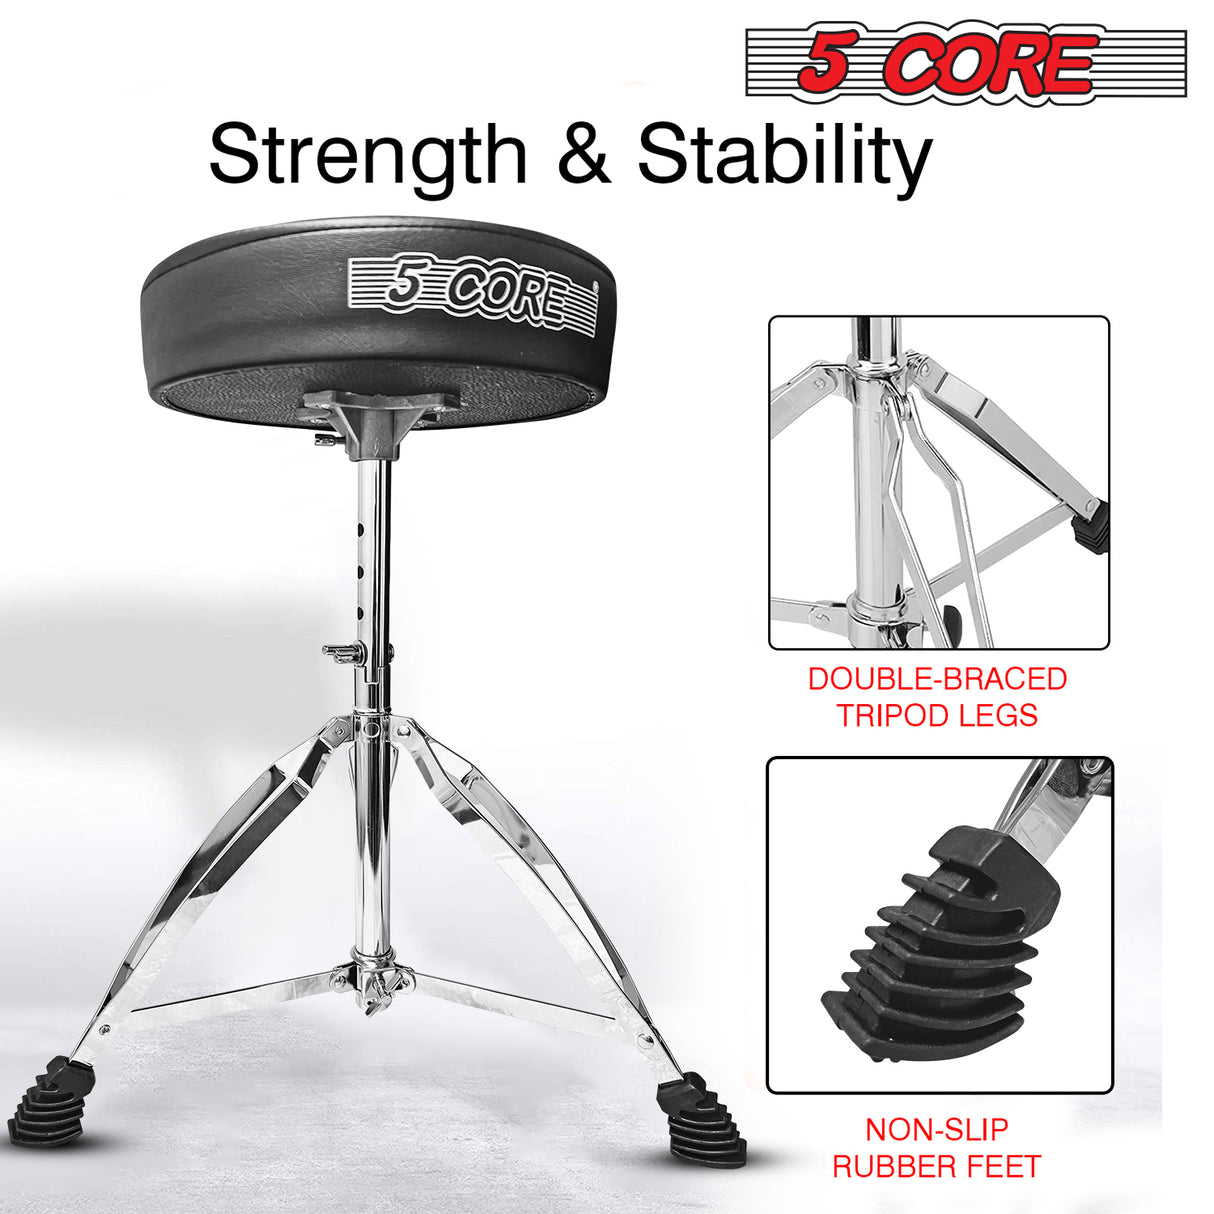 5 Core Drum Throne Black| Height Adjustable Padded Seat Drum Stool| Folding Portable Drummer Throne with Anti-Slip Feet| with two Drumsticks, Drum Chair for Kids and Adults- DS CH BLK